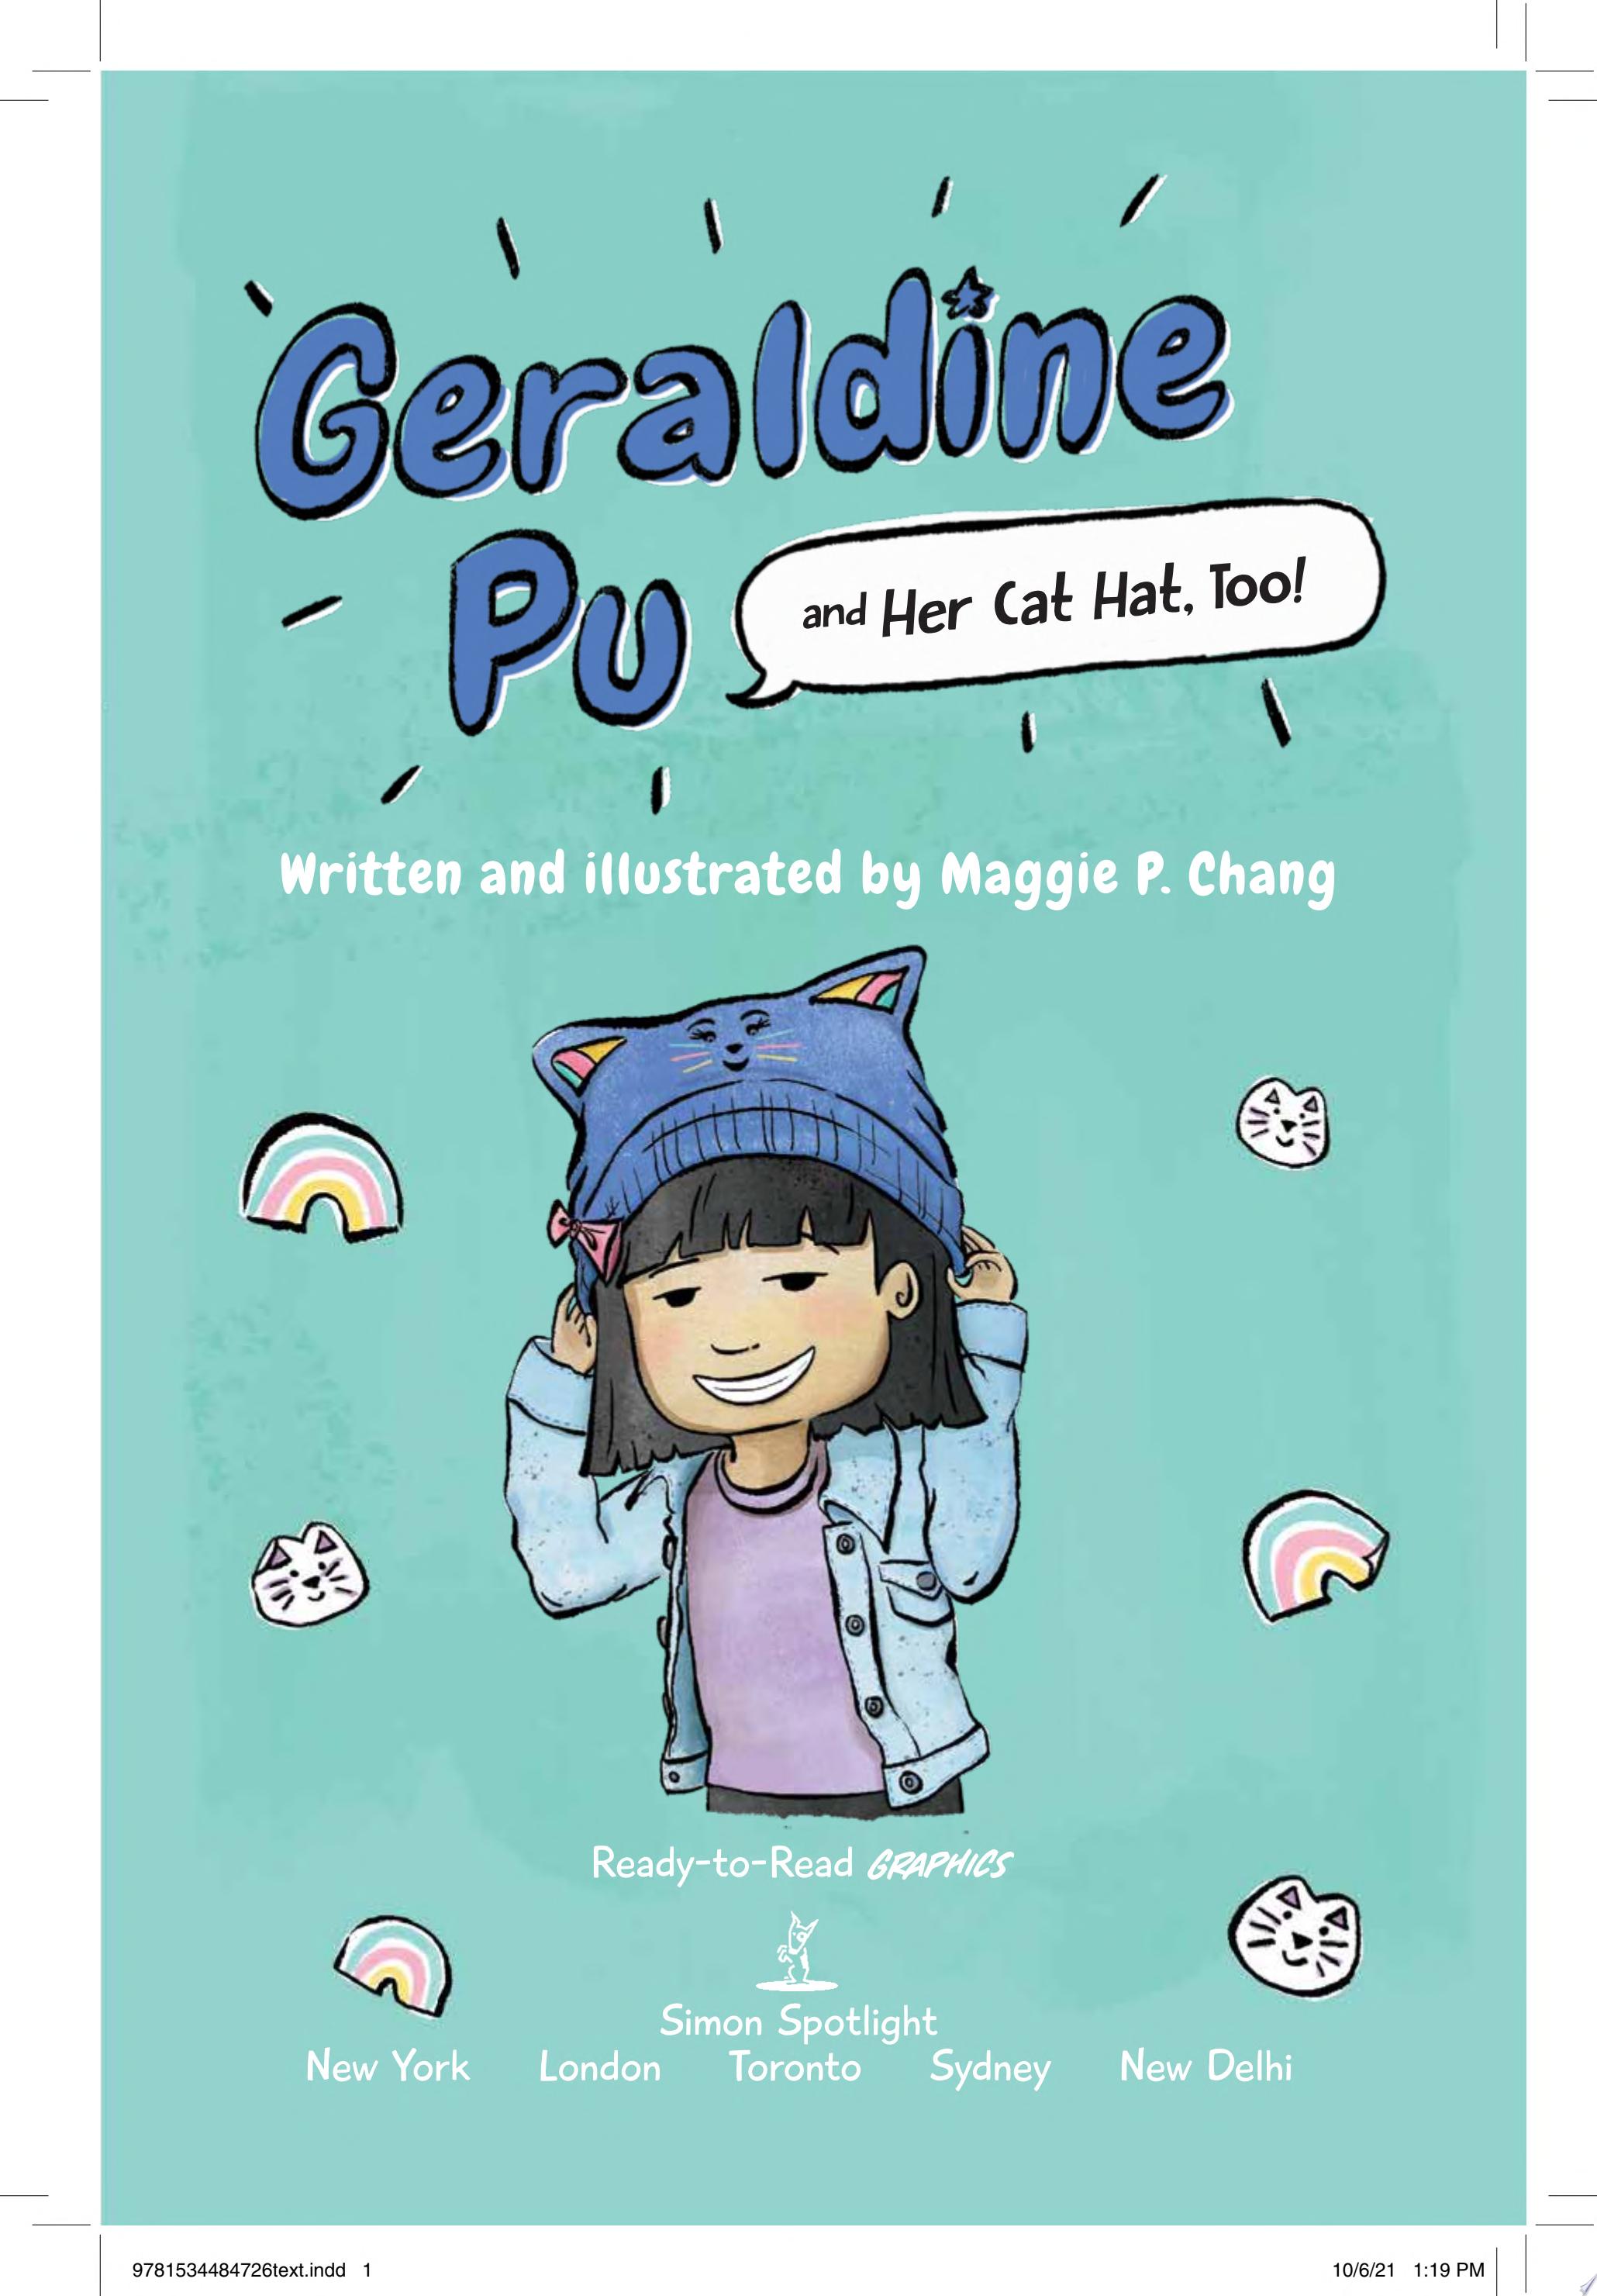 Image for "Geraldine Pu and Her Cat Hat, Too!"